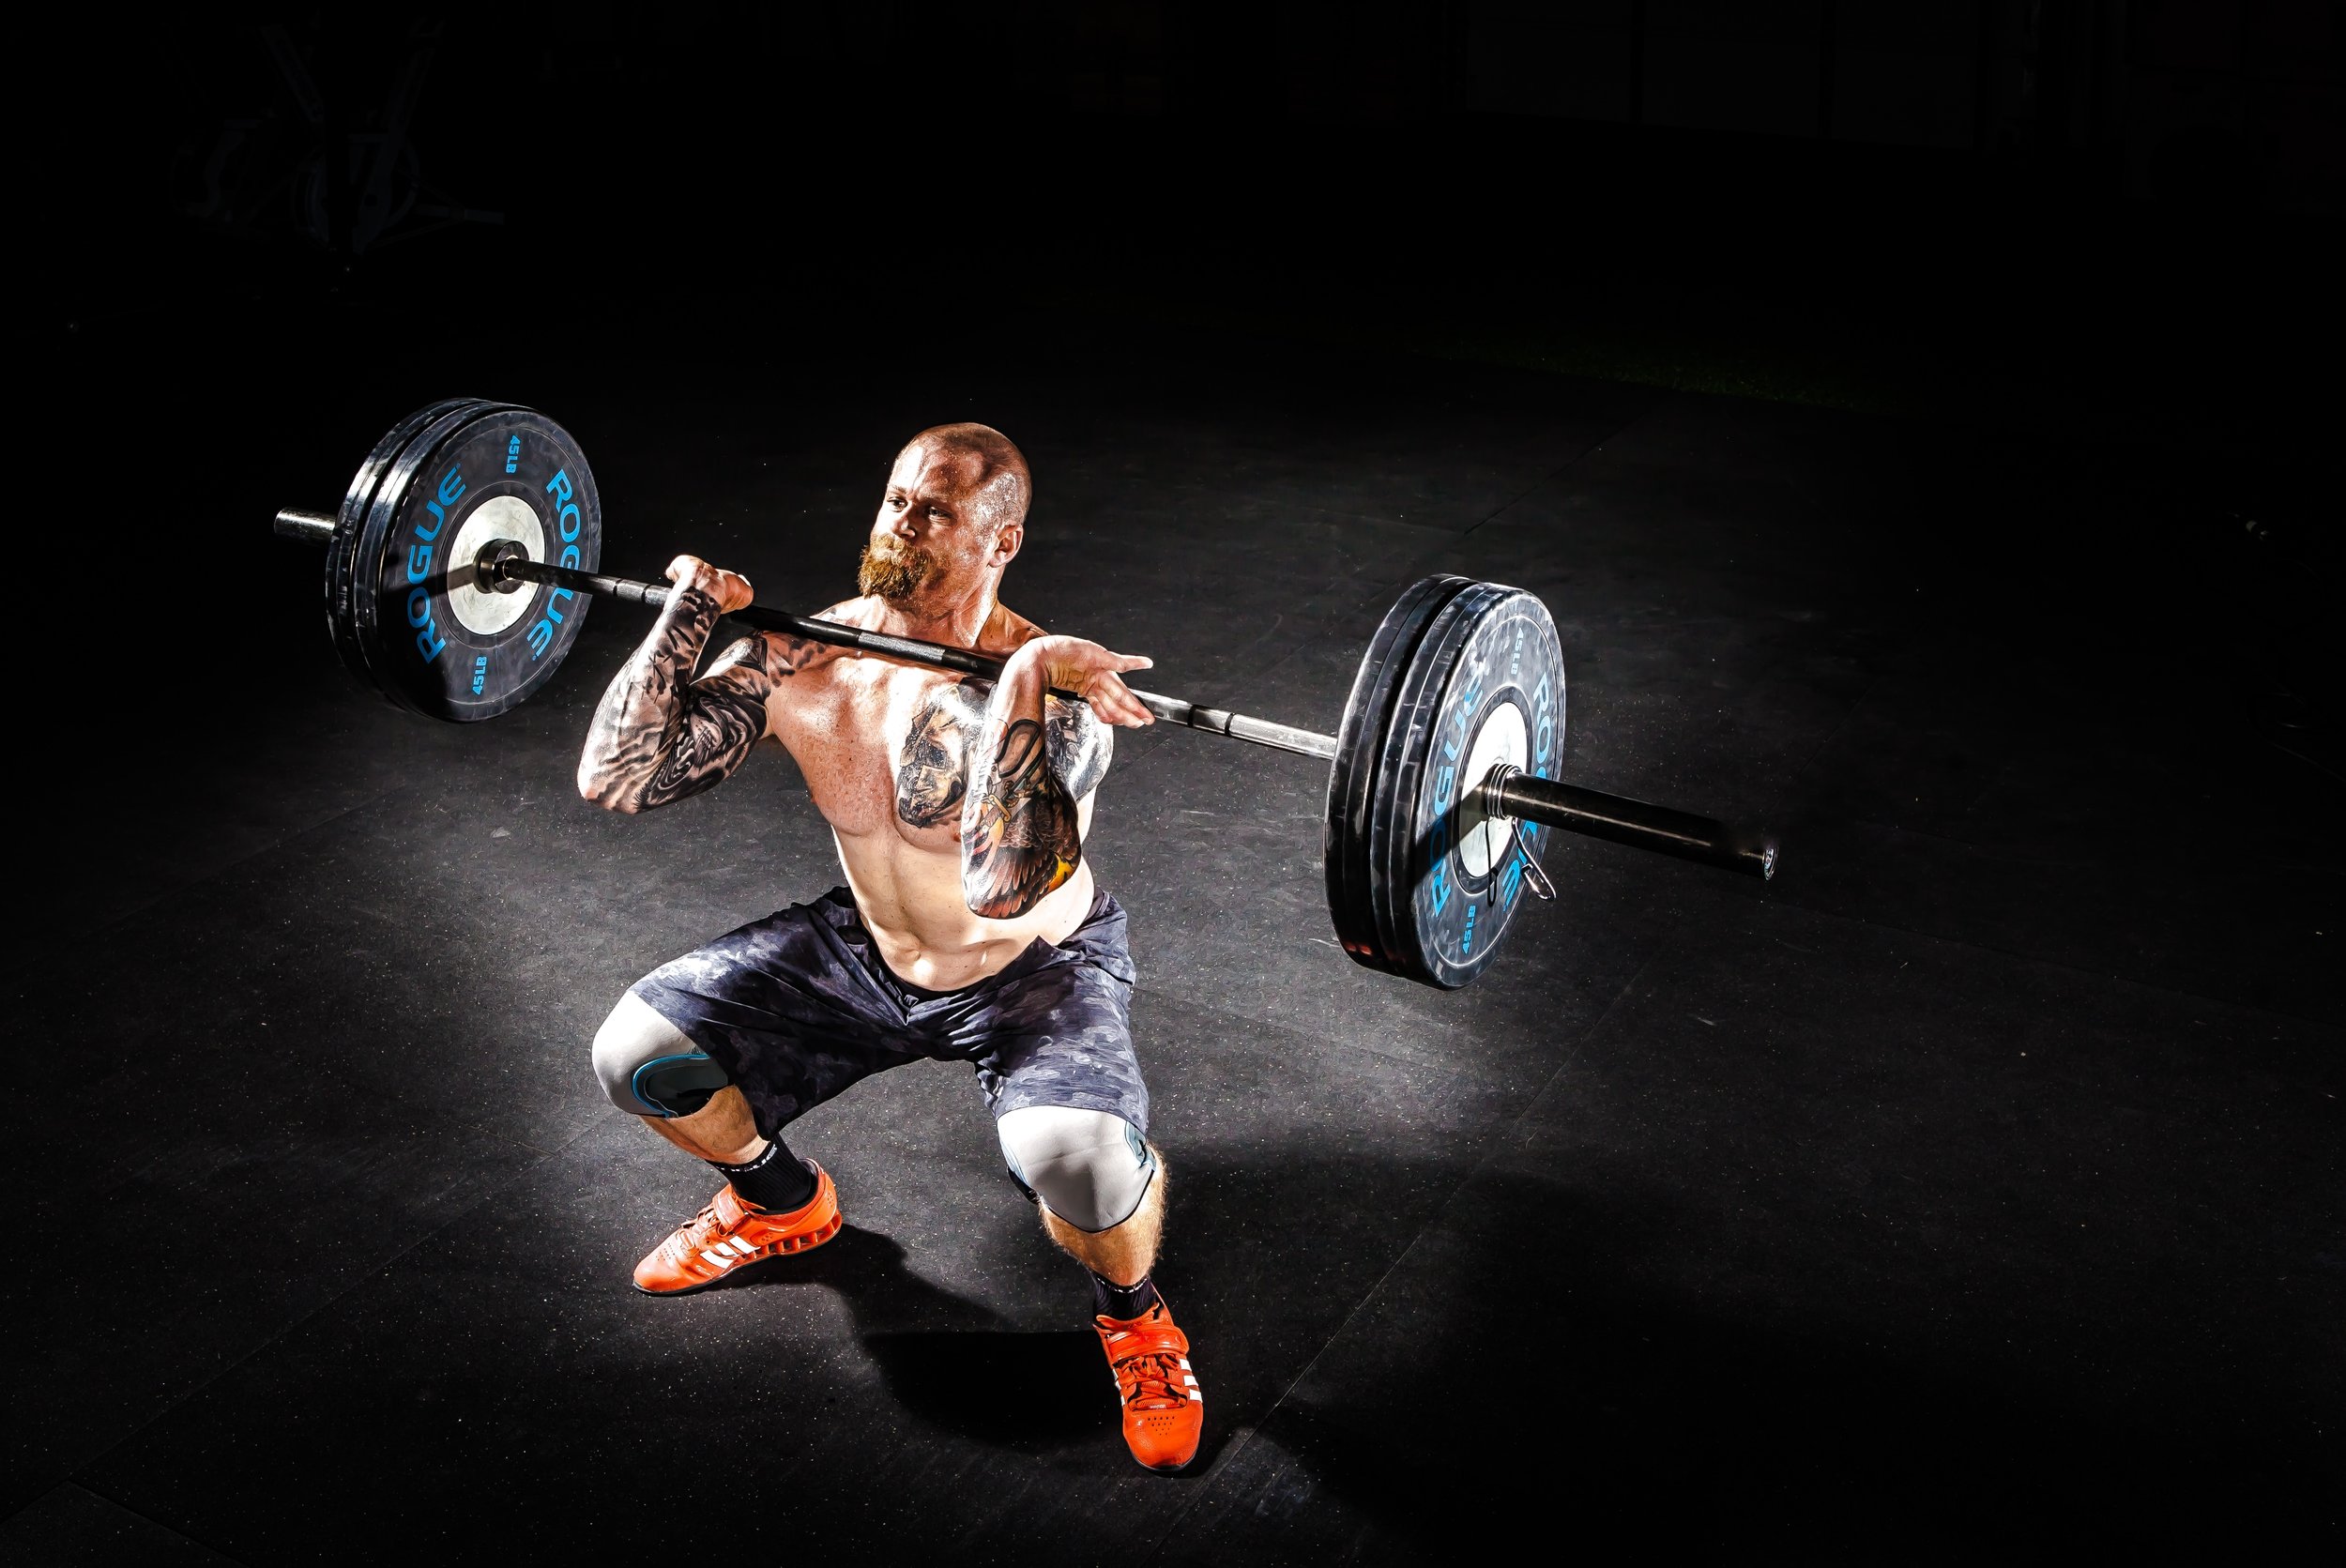 does weightlifting make you shorter?